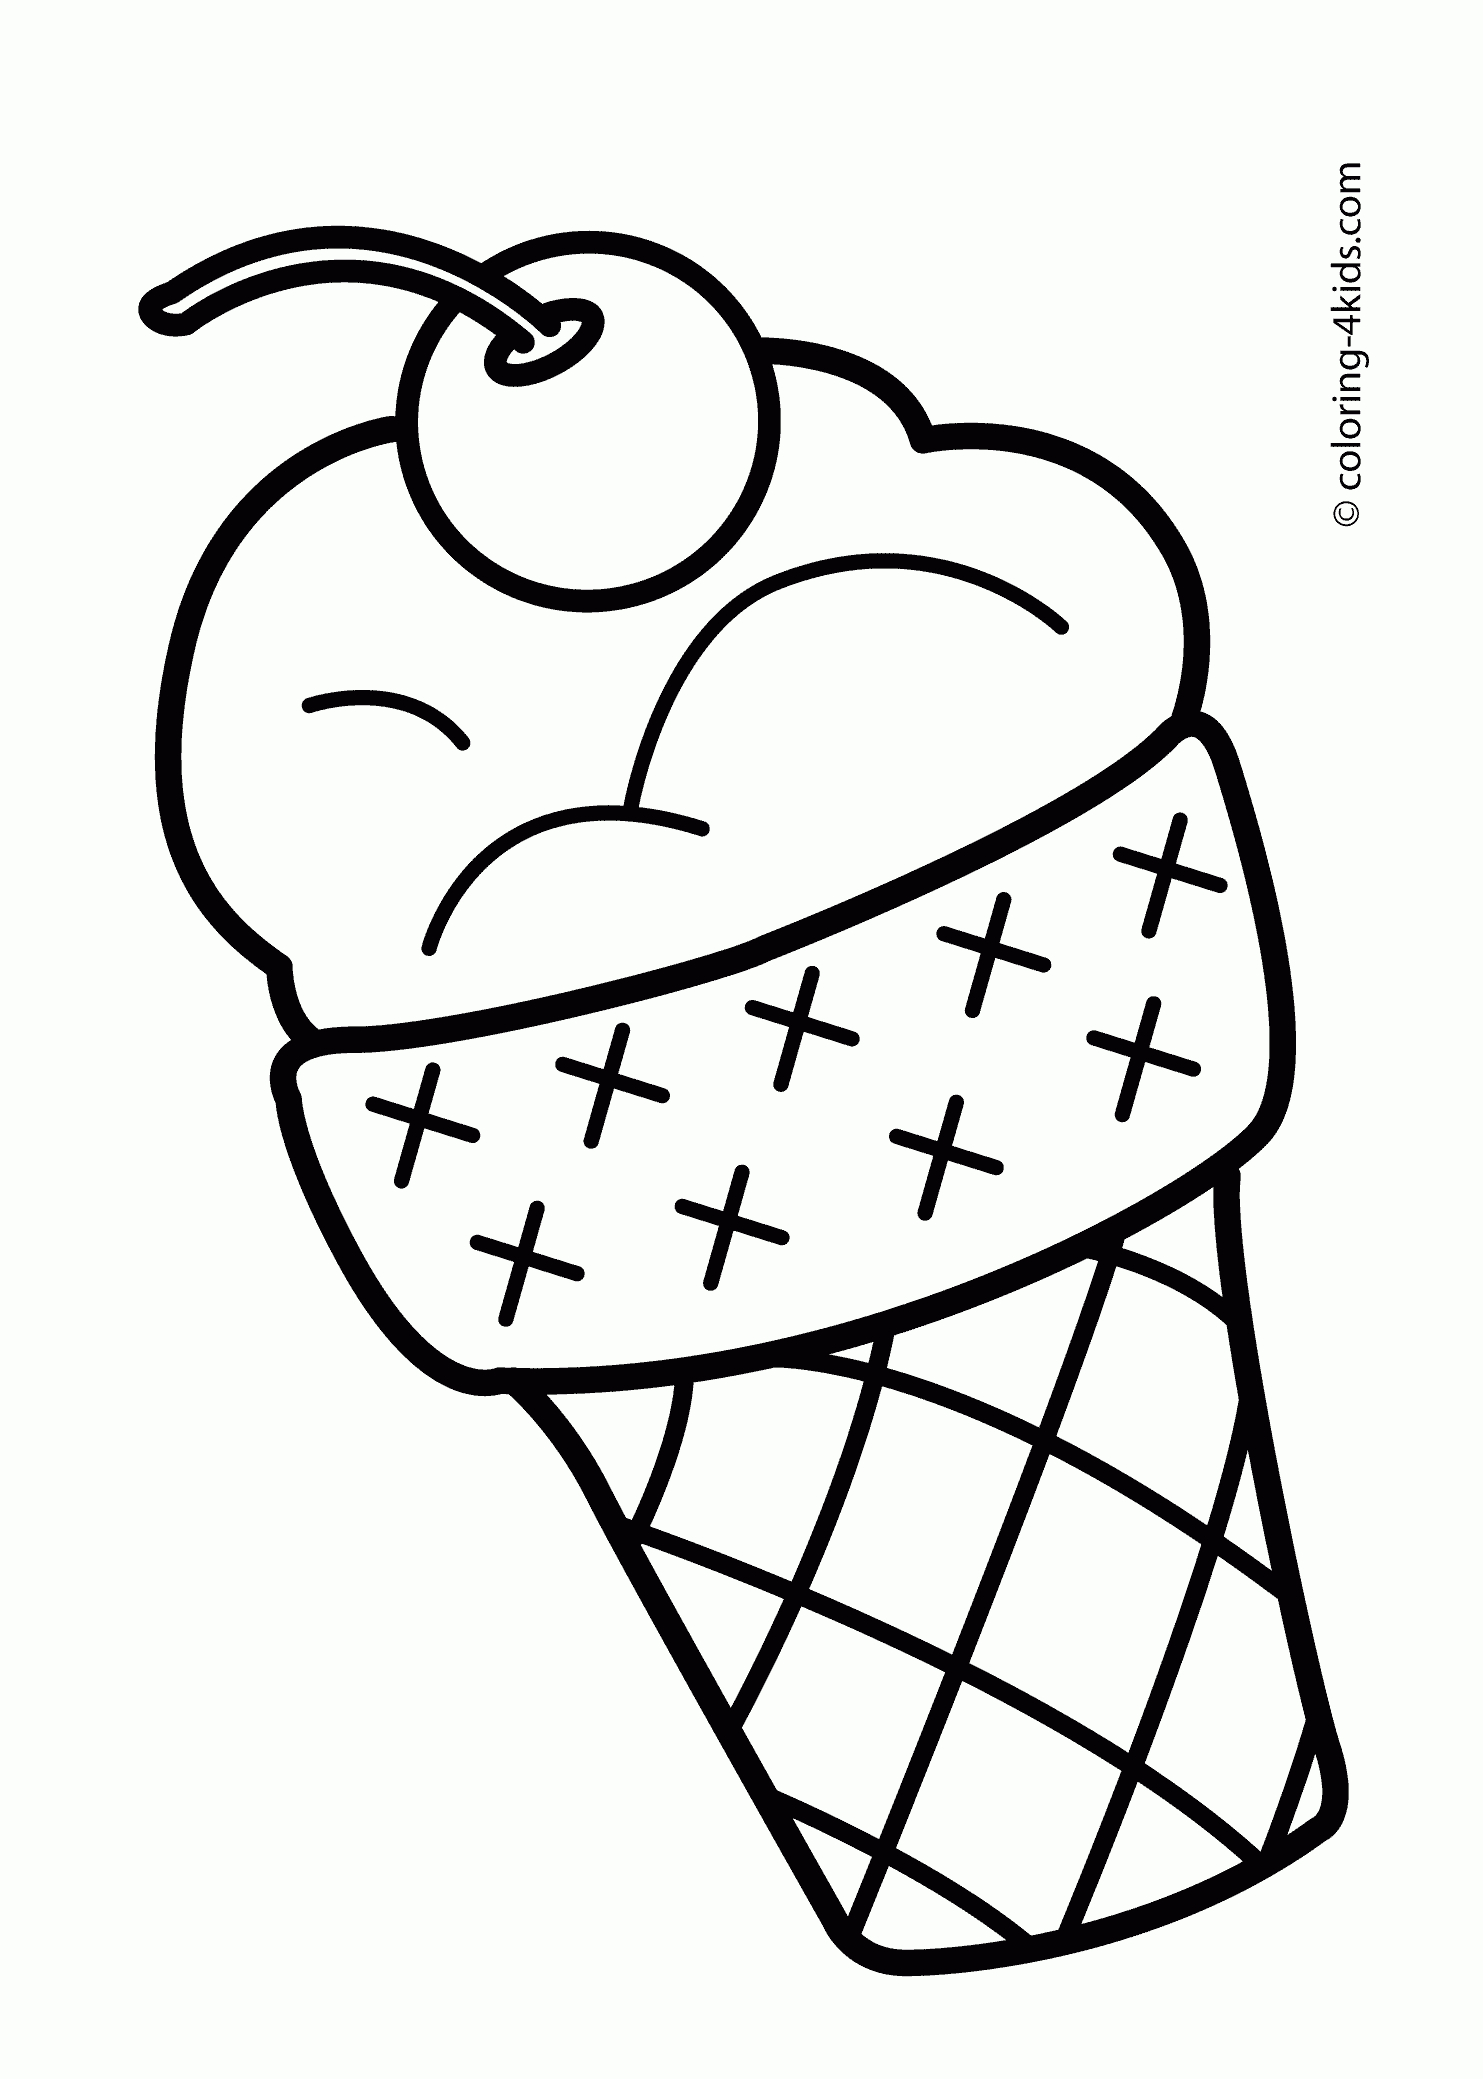 Coloring Pages : Summer Coloring Pages Printabler Free Sheets - Summer Coloring Sheets Free Printable